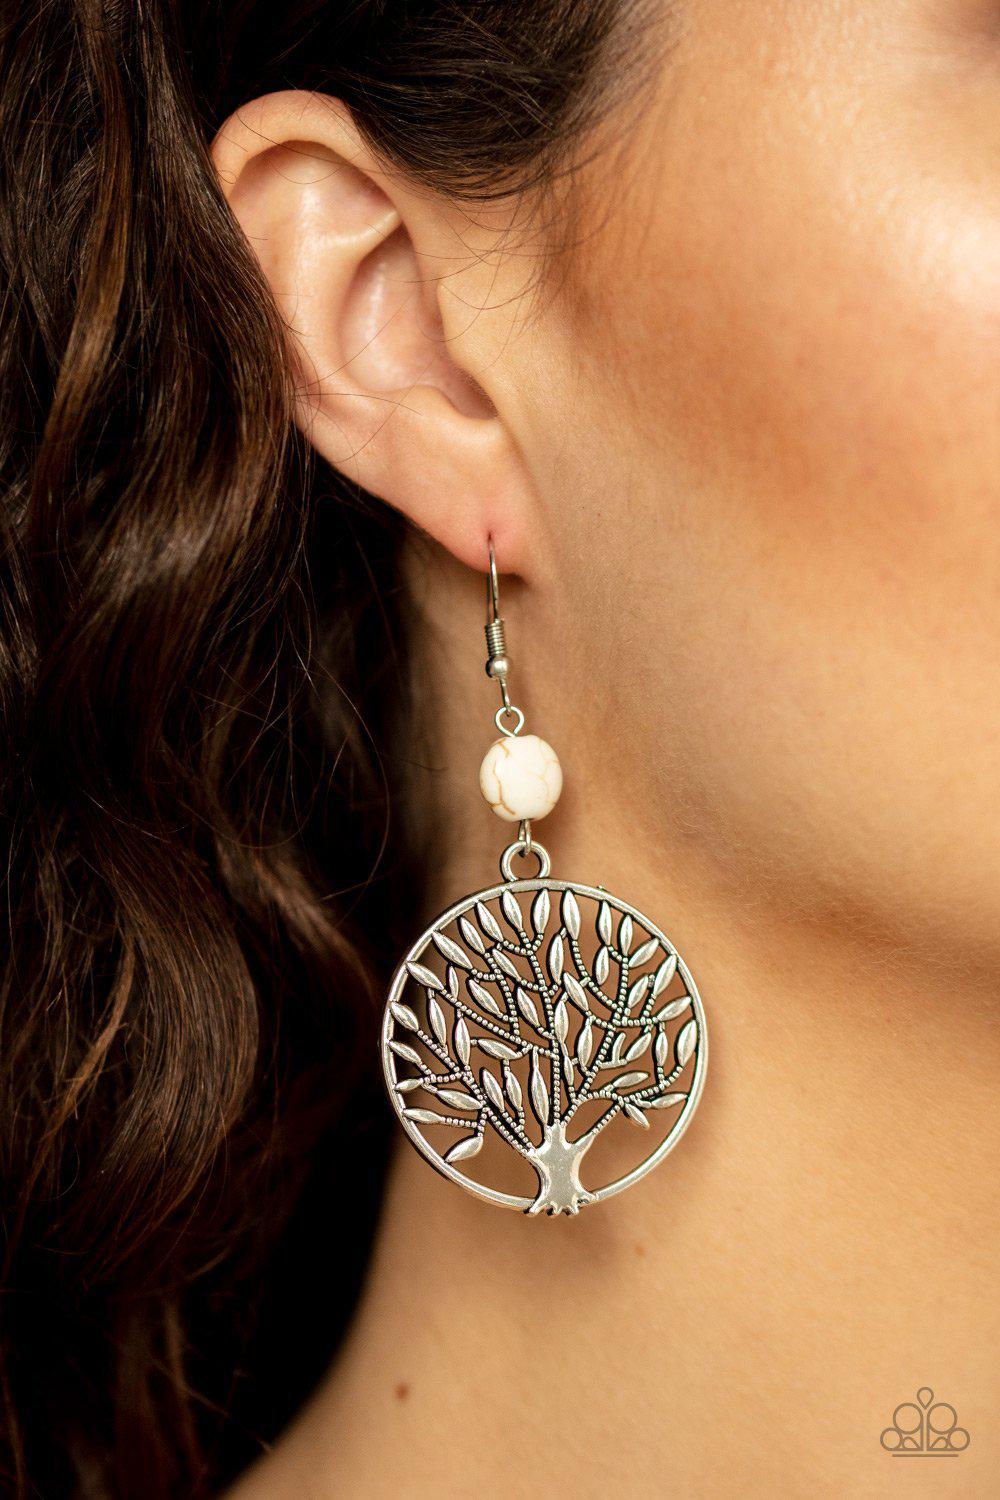 Bountiful Branches White Stone and Silver Tree Earrings - Paparazzi Accessories-CarasShop.com - $5 Jewelry by Cara Jewels